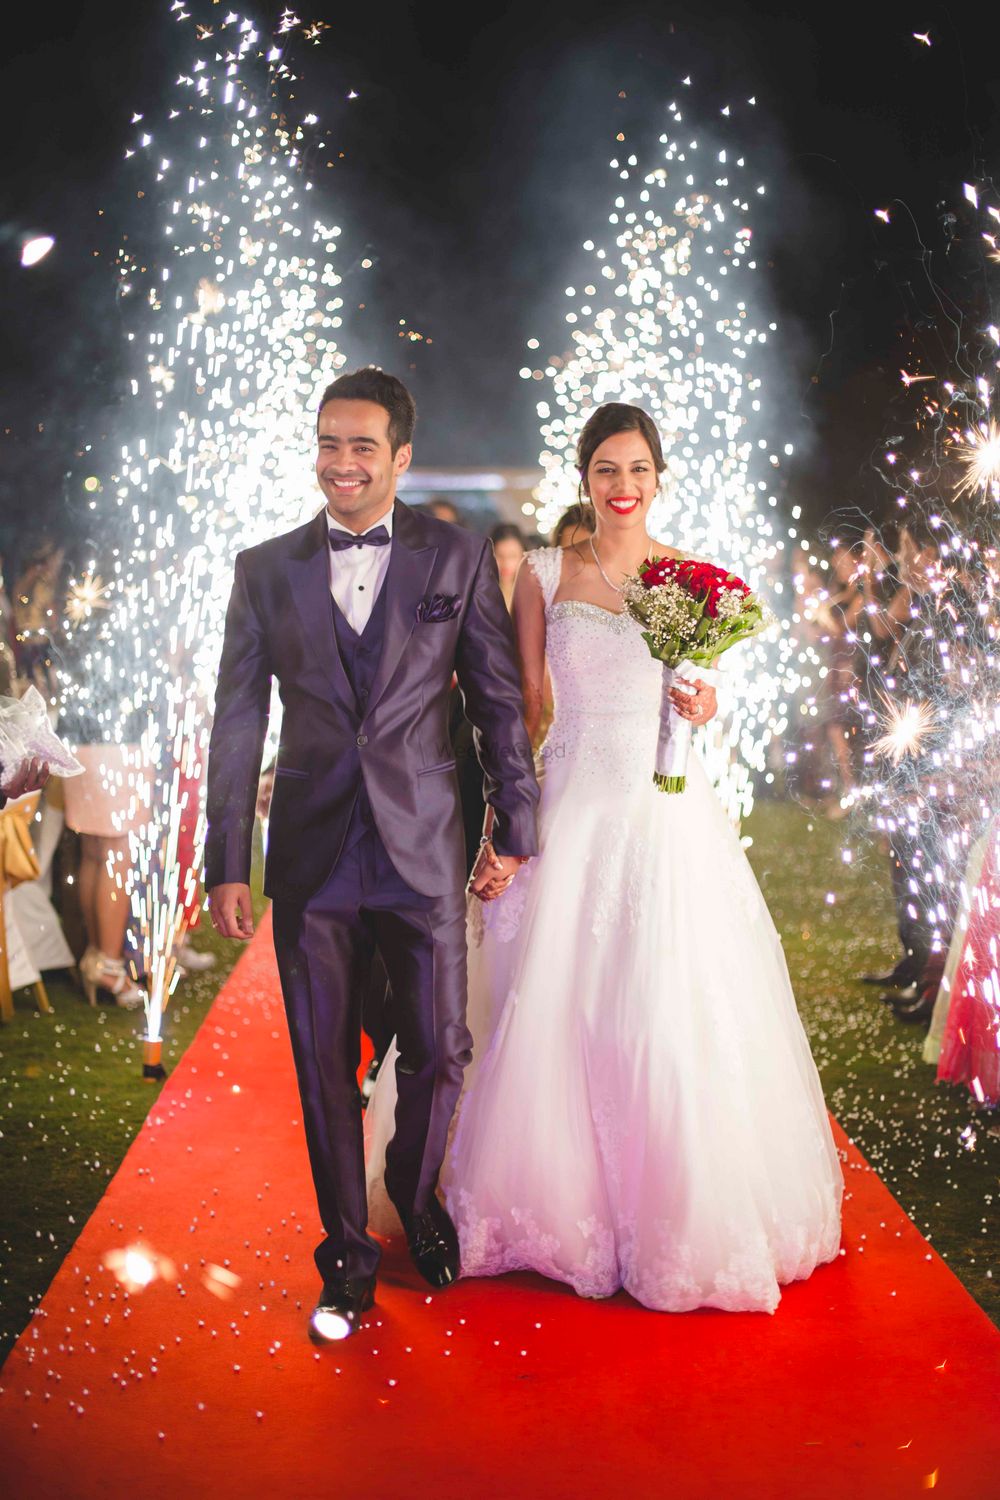 Photo of Christian Bride and Groom Entering to Fireworks